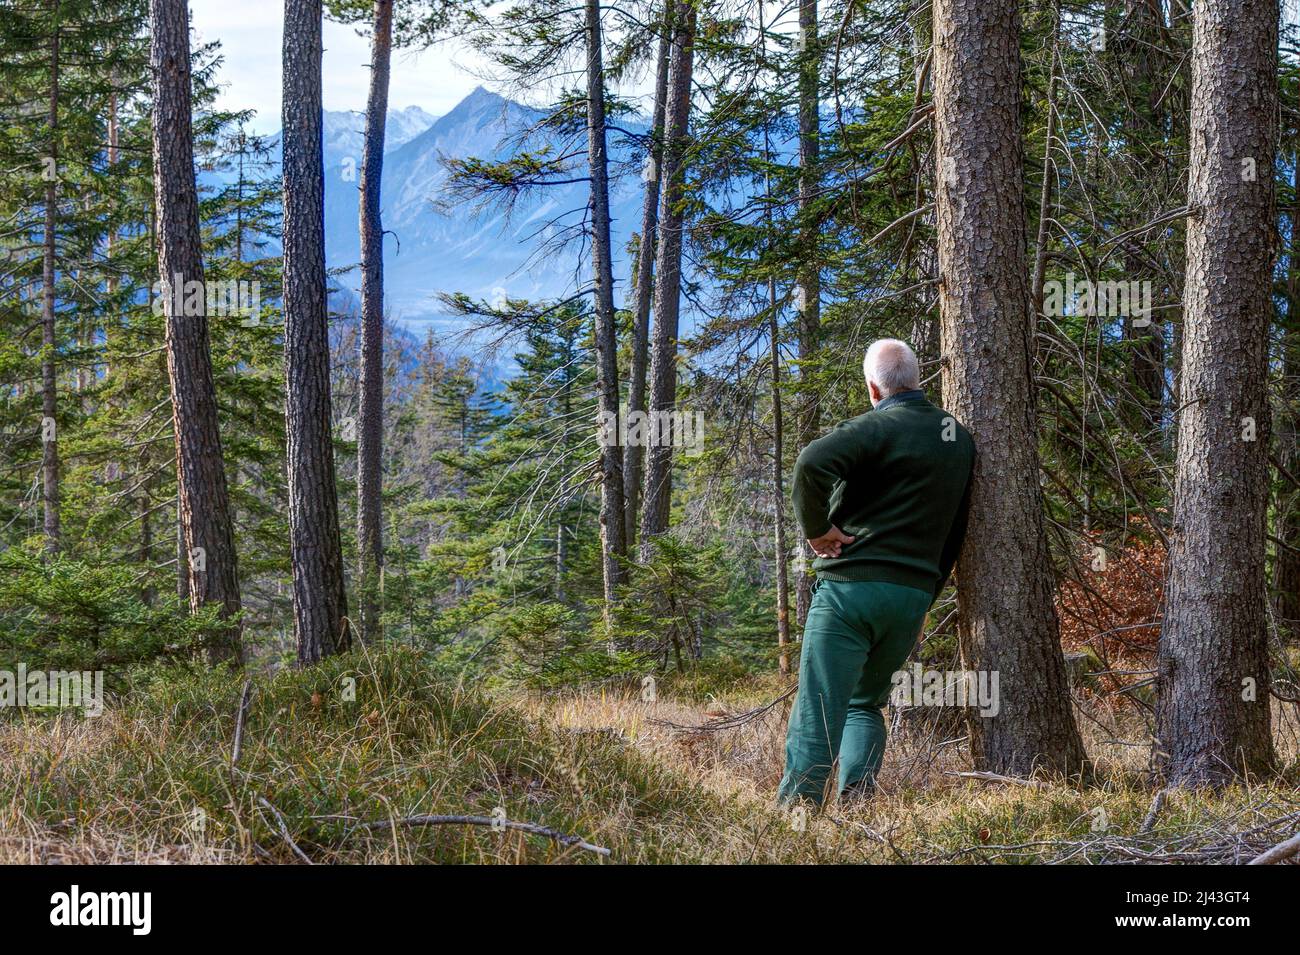 A mountain hiker in the Tyrolean Alps leans against a tree in the forest and enjoys the magnificent view of the mountains. Stock Photo